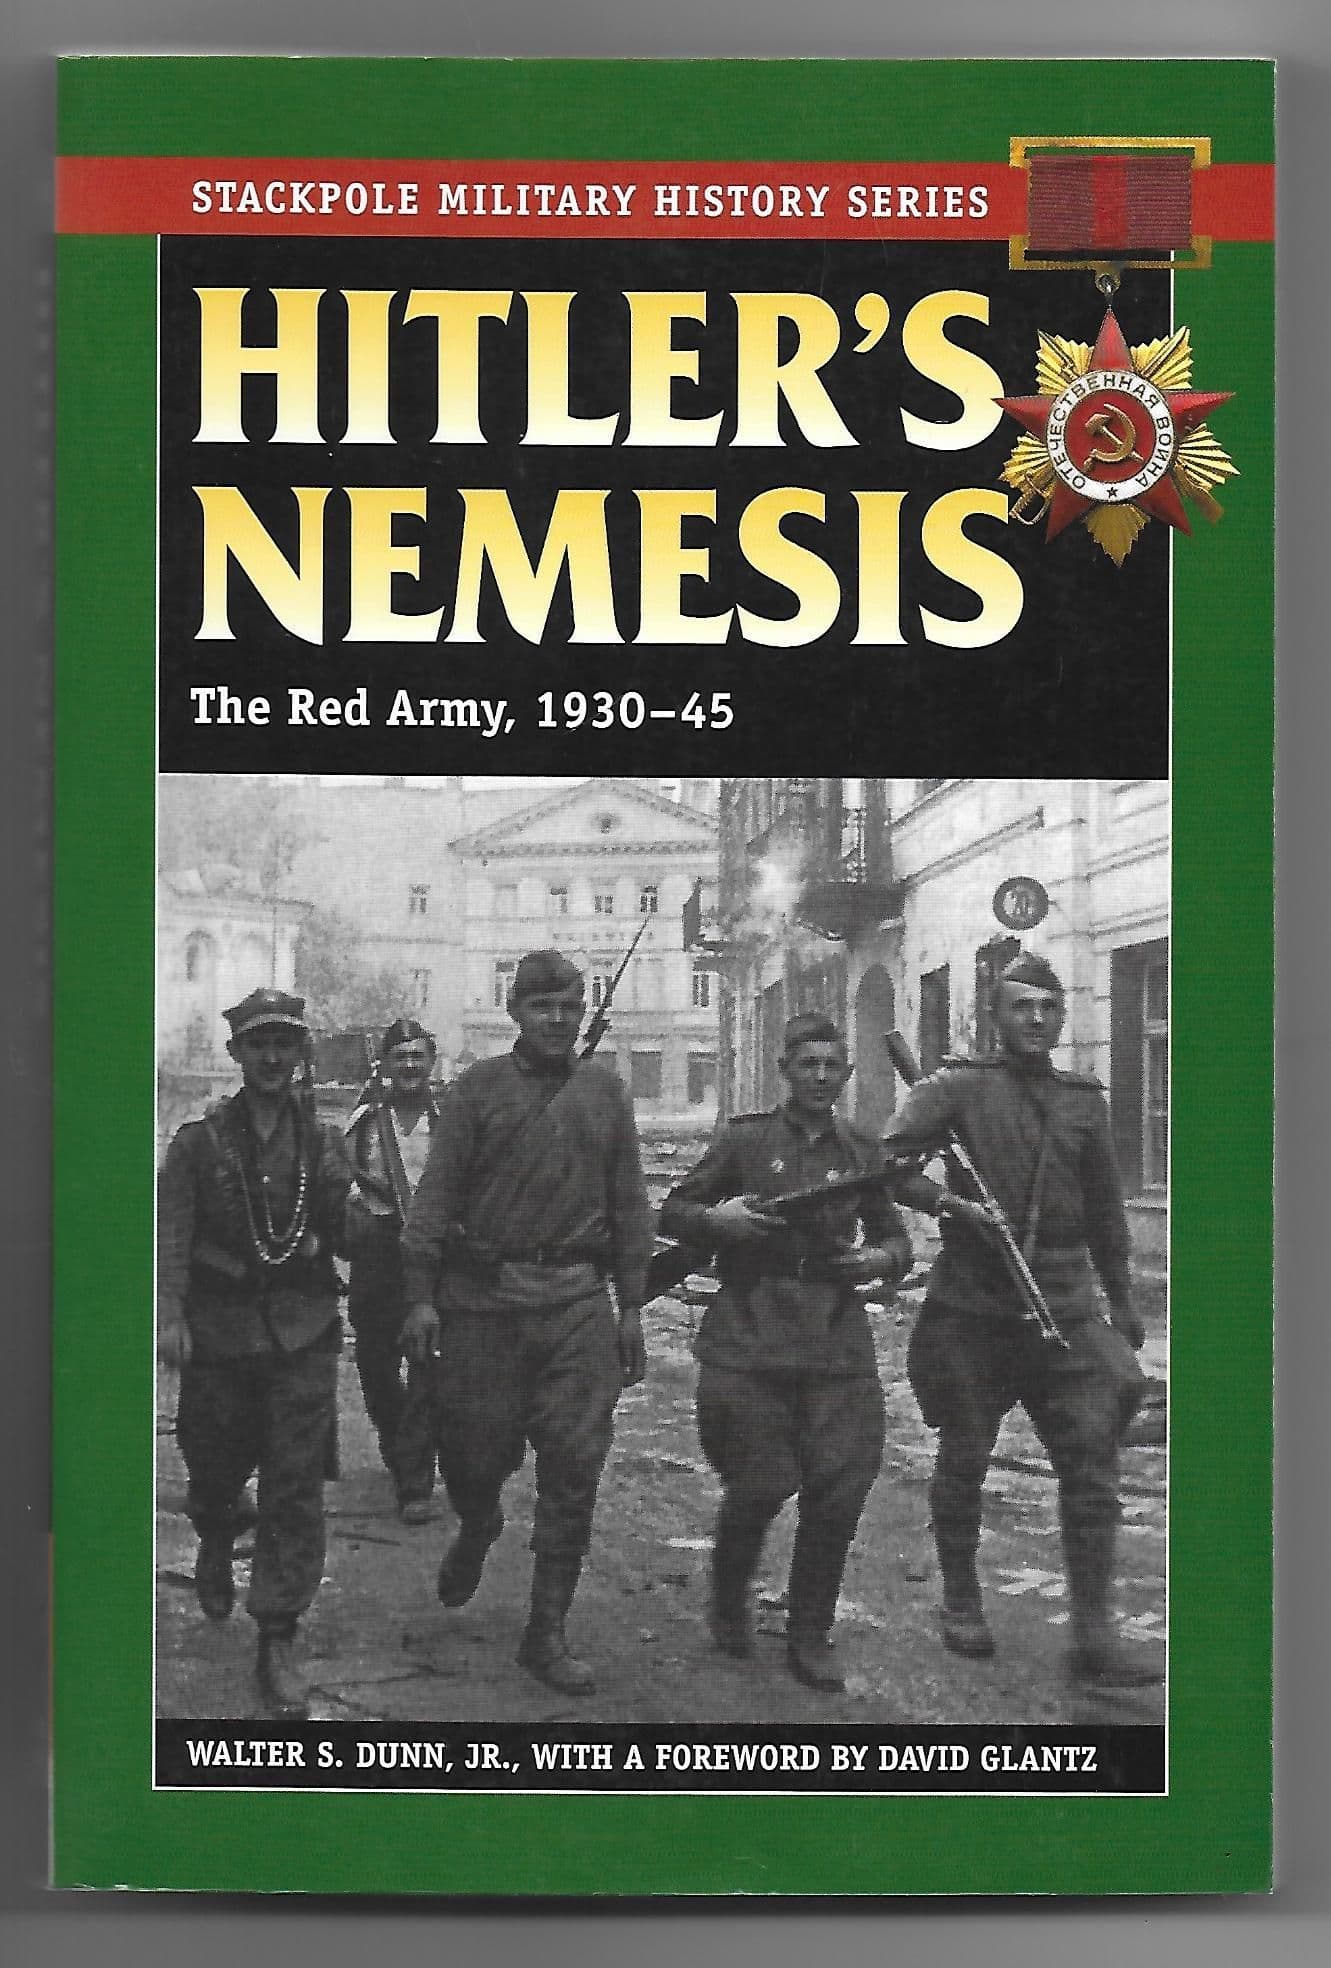 Stackpole: Hitler's Nemesis: The Red Army, 1930-45